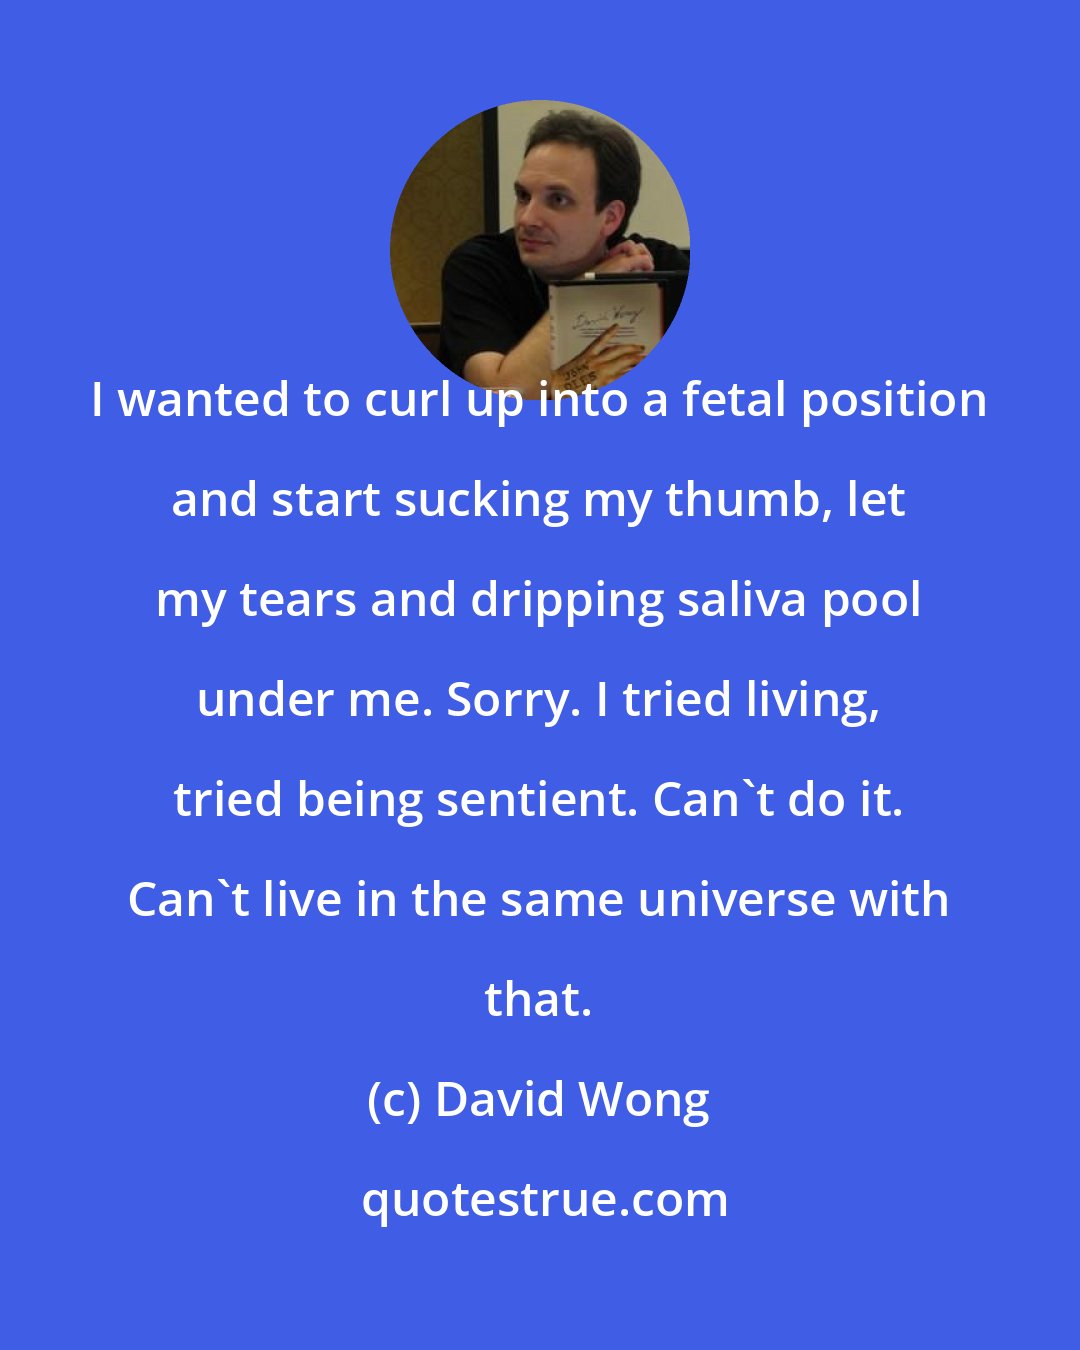 David Wong: I wanted to curl up into a fetal position and start sucking my thumb, let my tears and dripping saliva pool under me. Sorry. I tried living, tried being sentient. Can't do it. Can't live in the same universe with that.